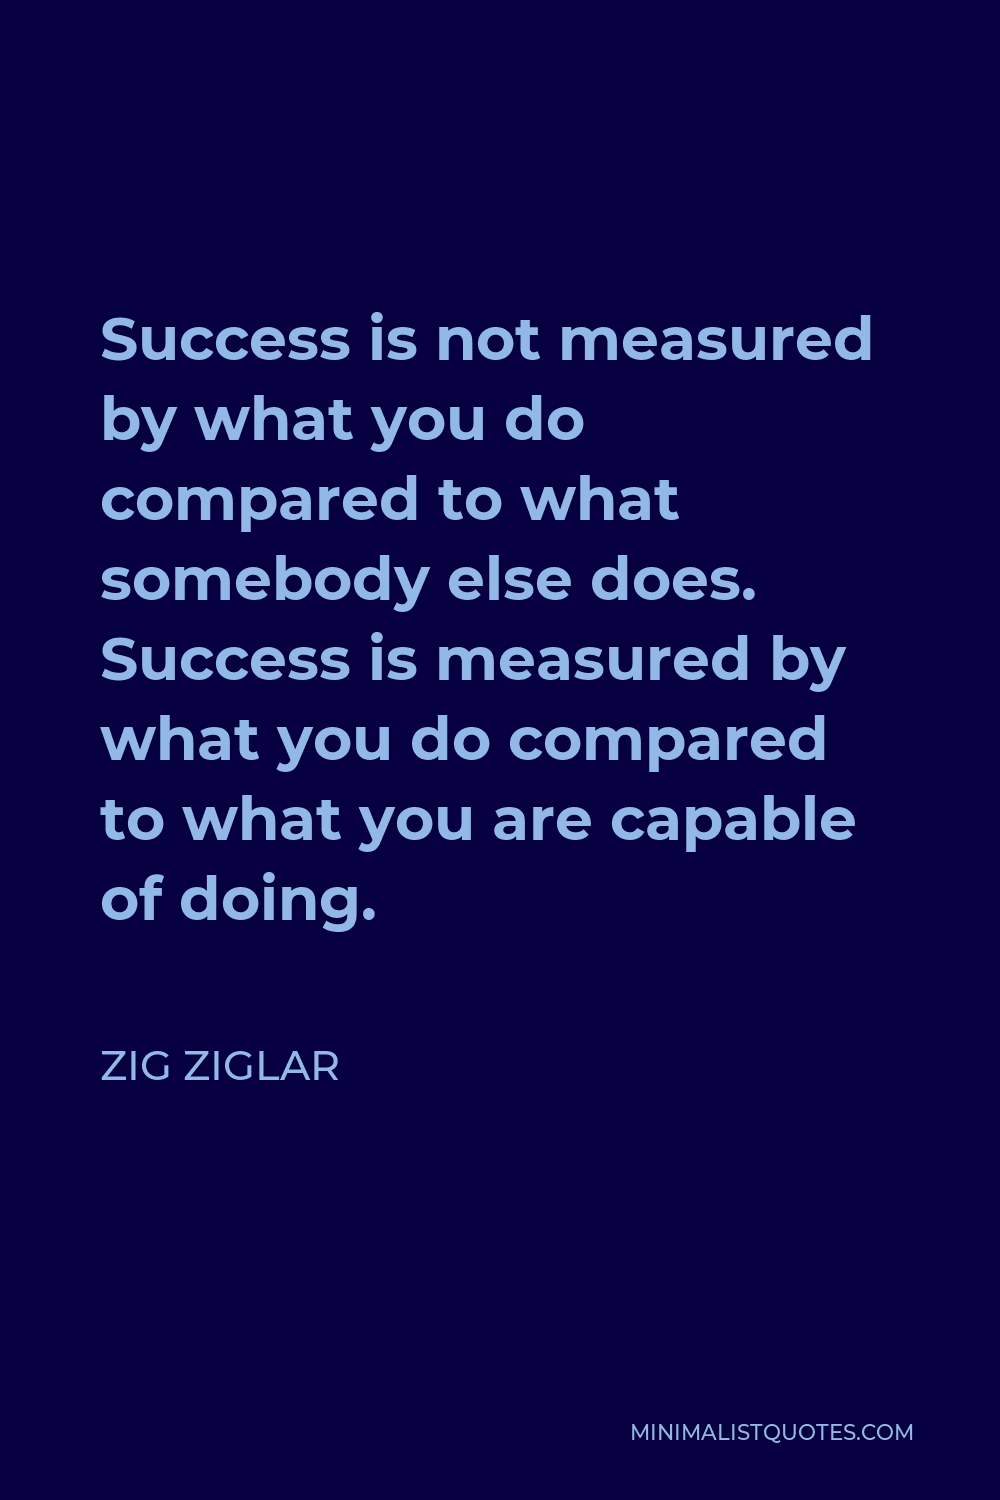 Zig Ziglar Quote - Success is not measured by what you do compared to what somebody else does. Success is measured by what you do compared to what you are capable of doing.